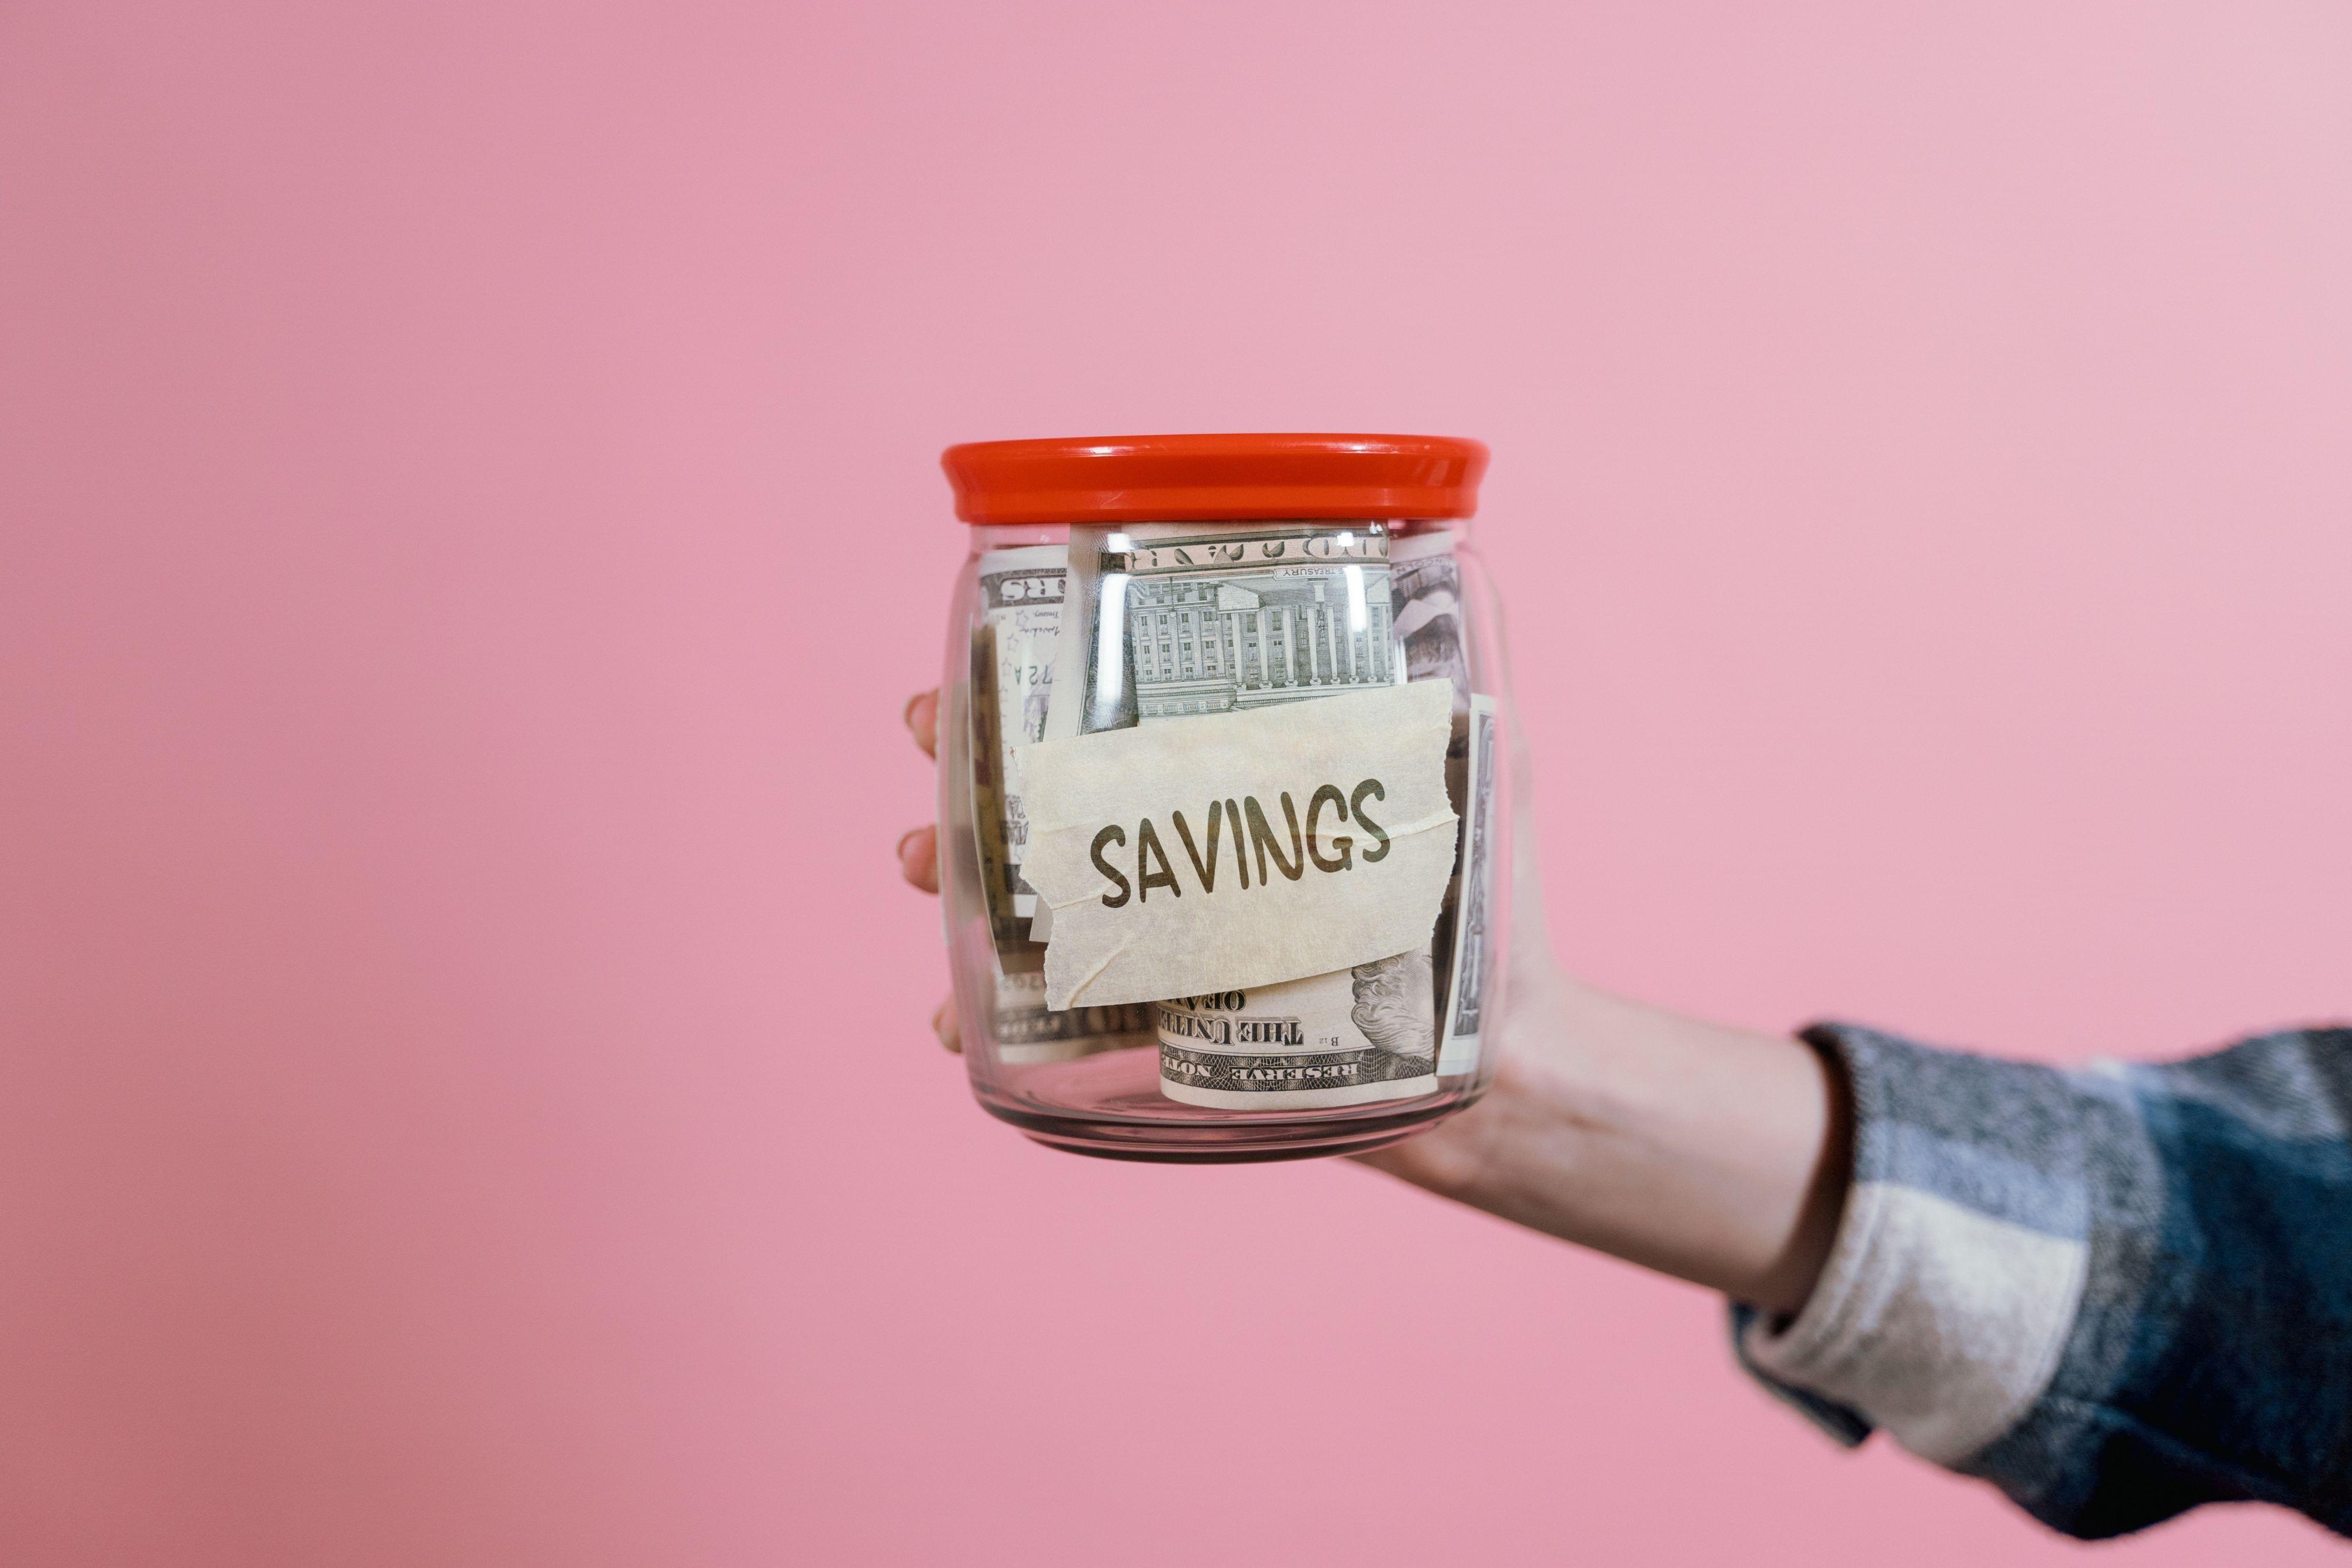 A hand holding a jar full of money with a red cap and a label that says "savings" in front of a pink background